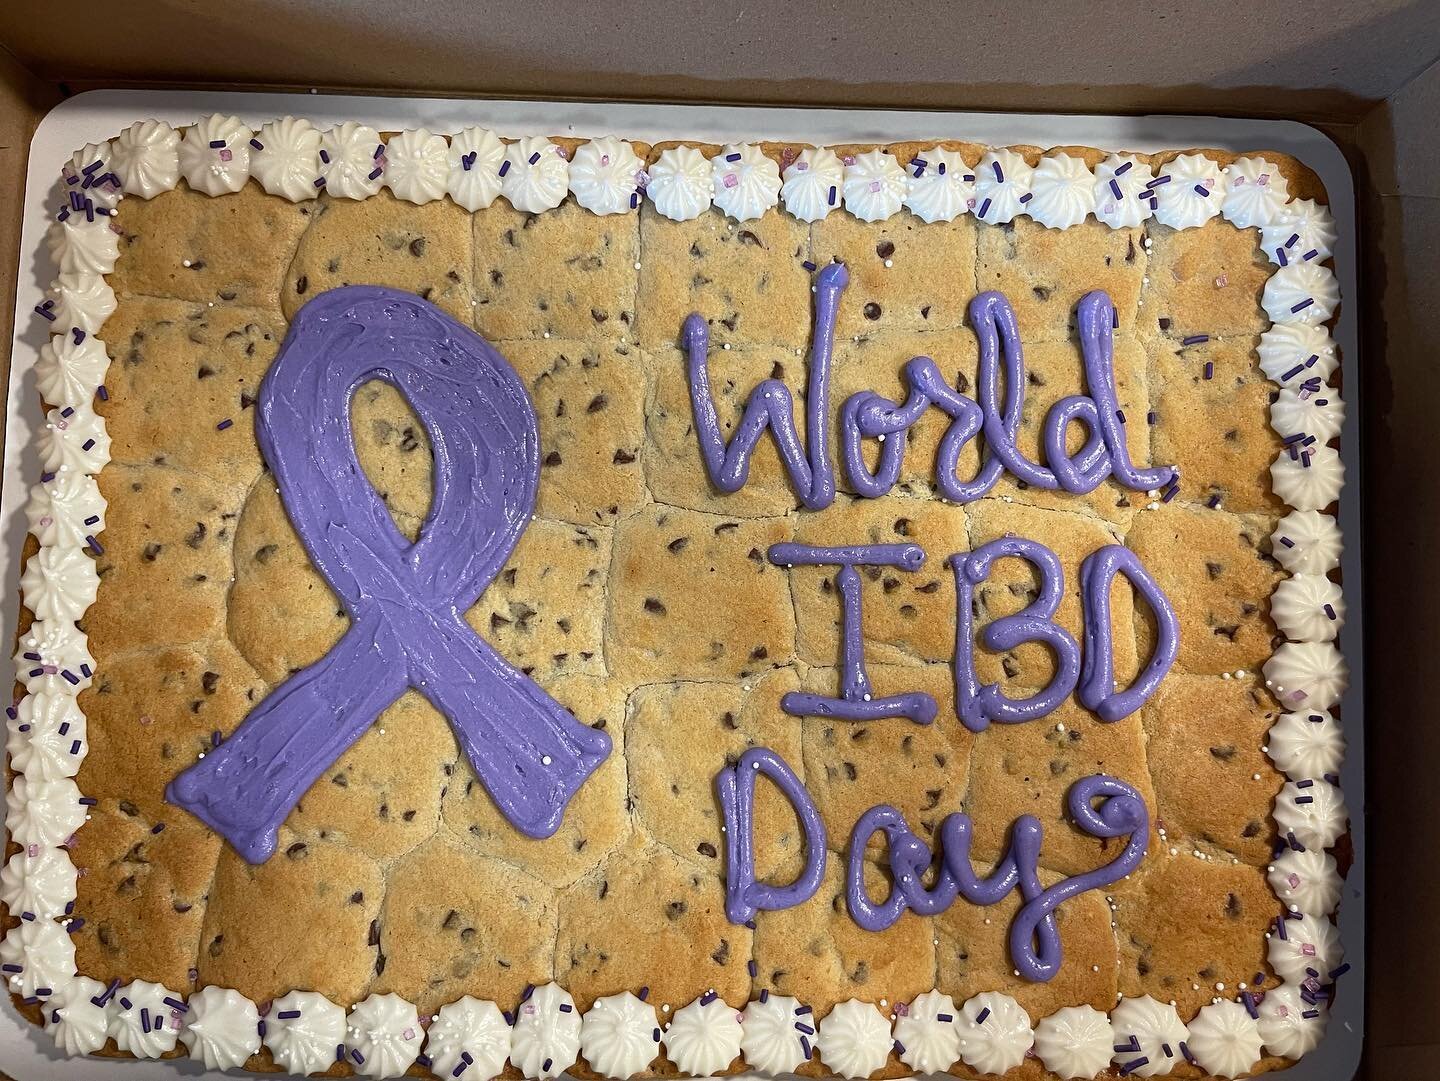 Happy World IBD Day Everyone! 🌎💩🗓️

Juuuuust a friendly reminder that we take orders for annnnnnny thing (not just school birthdays) and will deliver annnnywhere including medical offices (such as this), law offices and well alllll offices.

Cooki